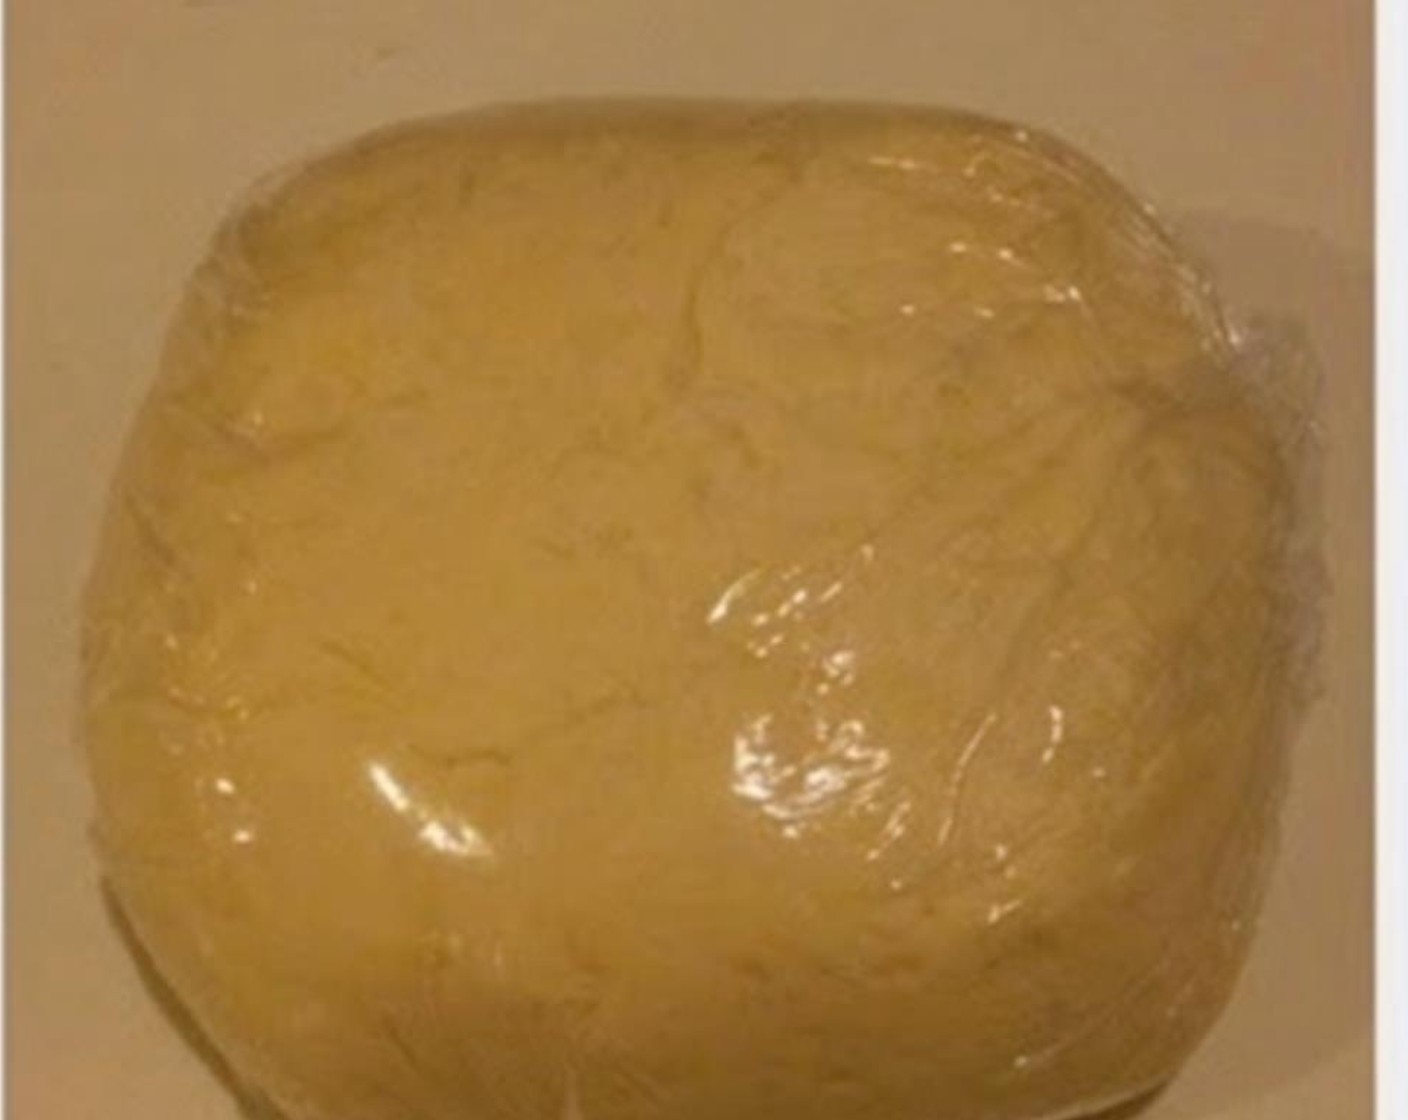 step 2 Make a well in the middle and pour in Butter. Combine the Buttermilk (3/4 cup) with flour and transfer to a table for kneading. Knead until the dough reaches a smooth surface. Wrap with cling wrap and rest in the fridge for 30 minutes.